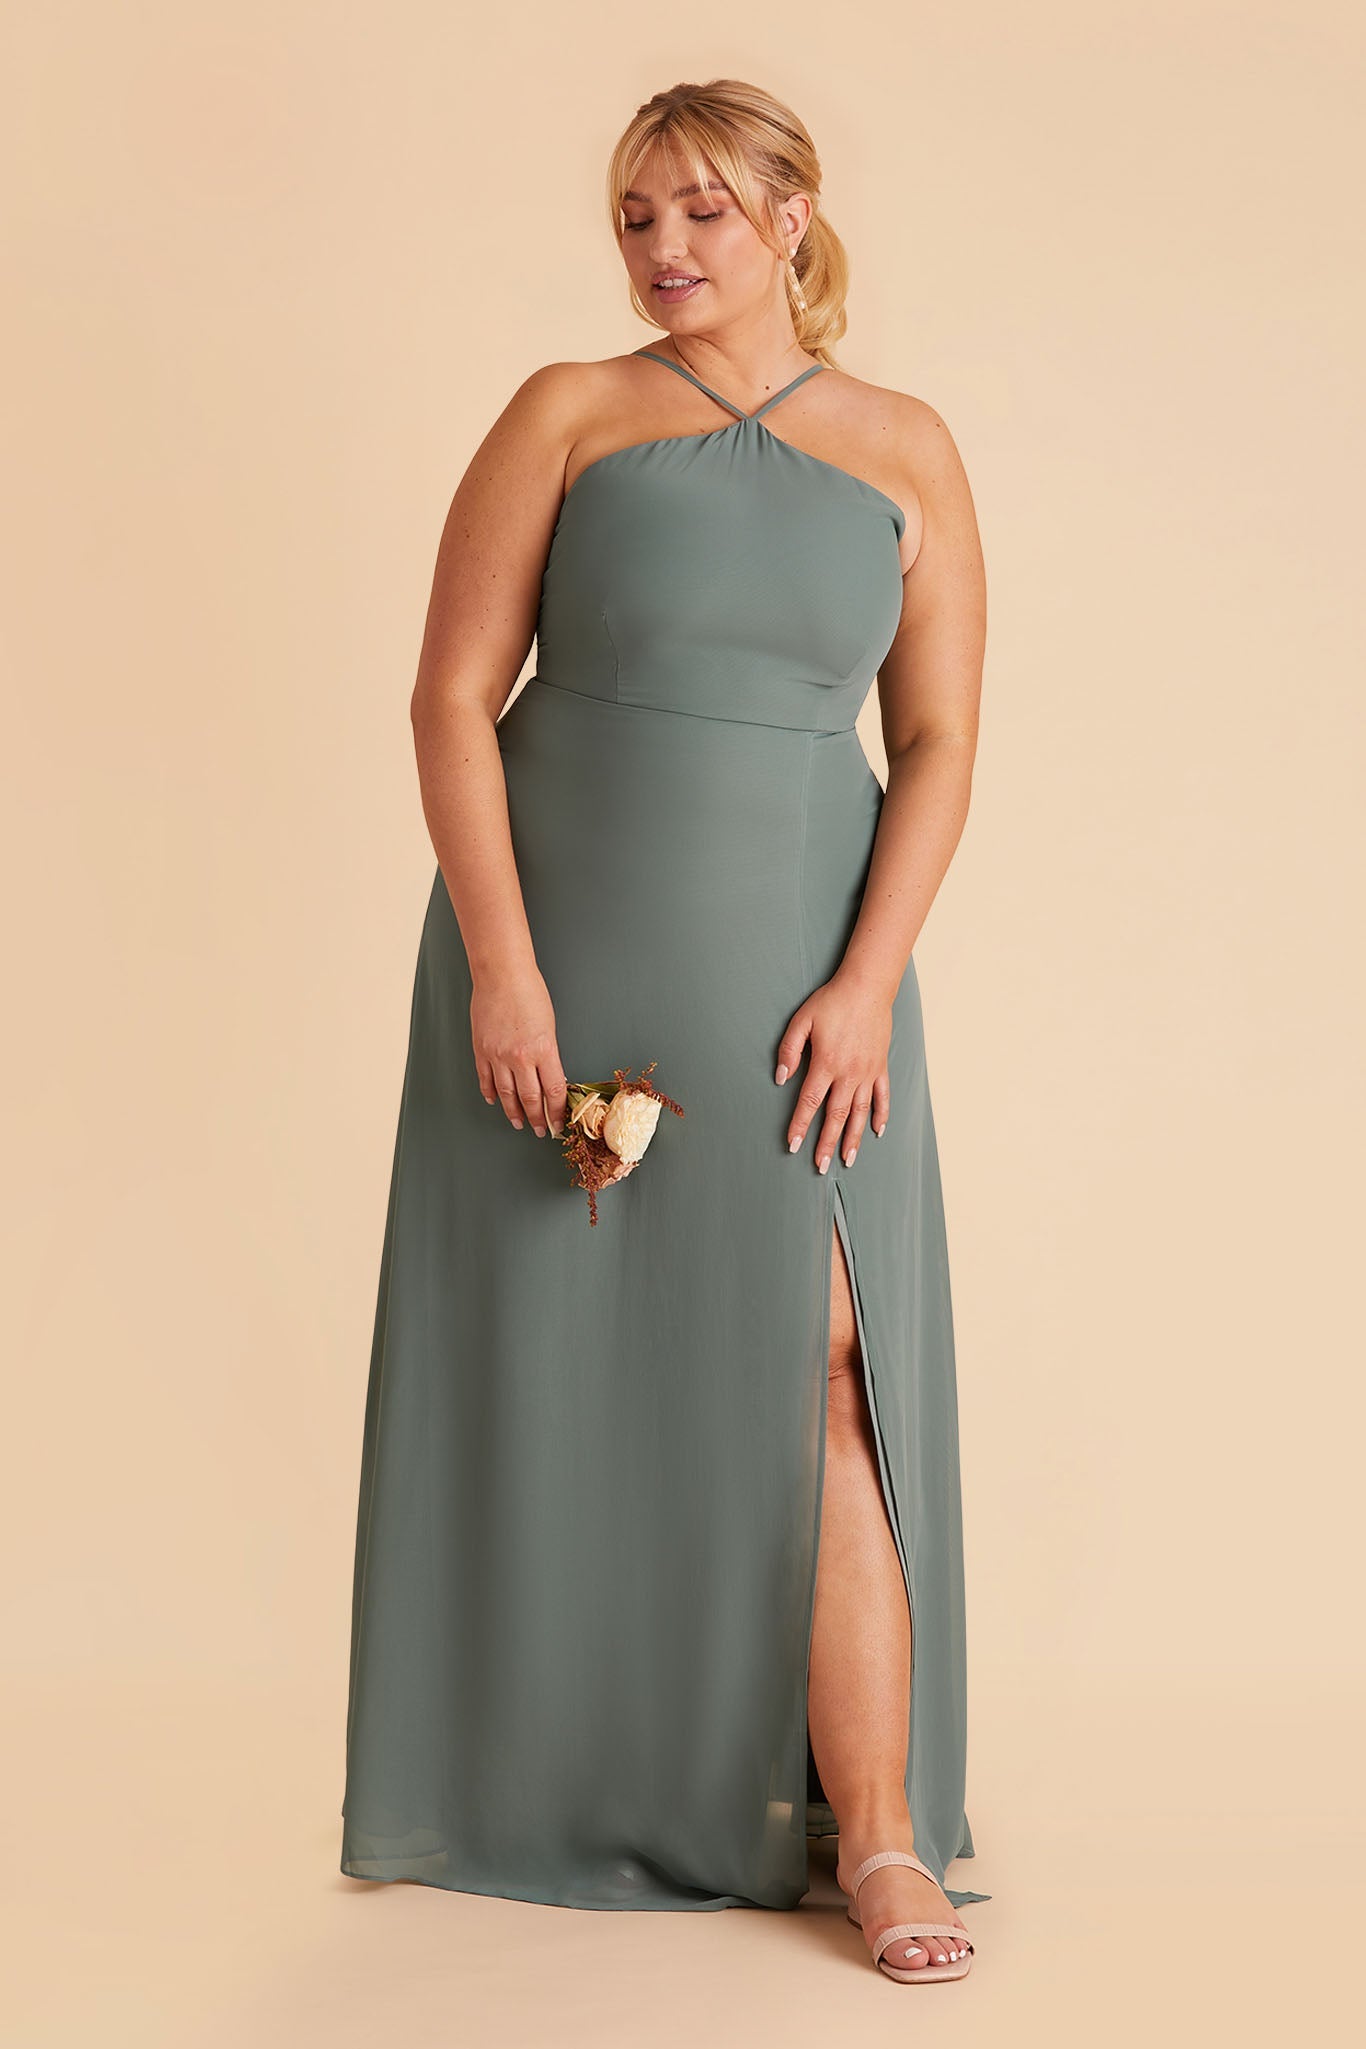 Juliet plus size bridesmaid dress with slit in sea glass chiffon by Birdy Grey, front view